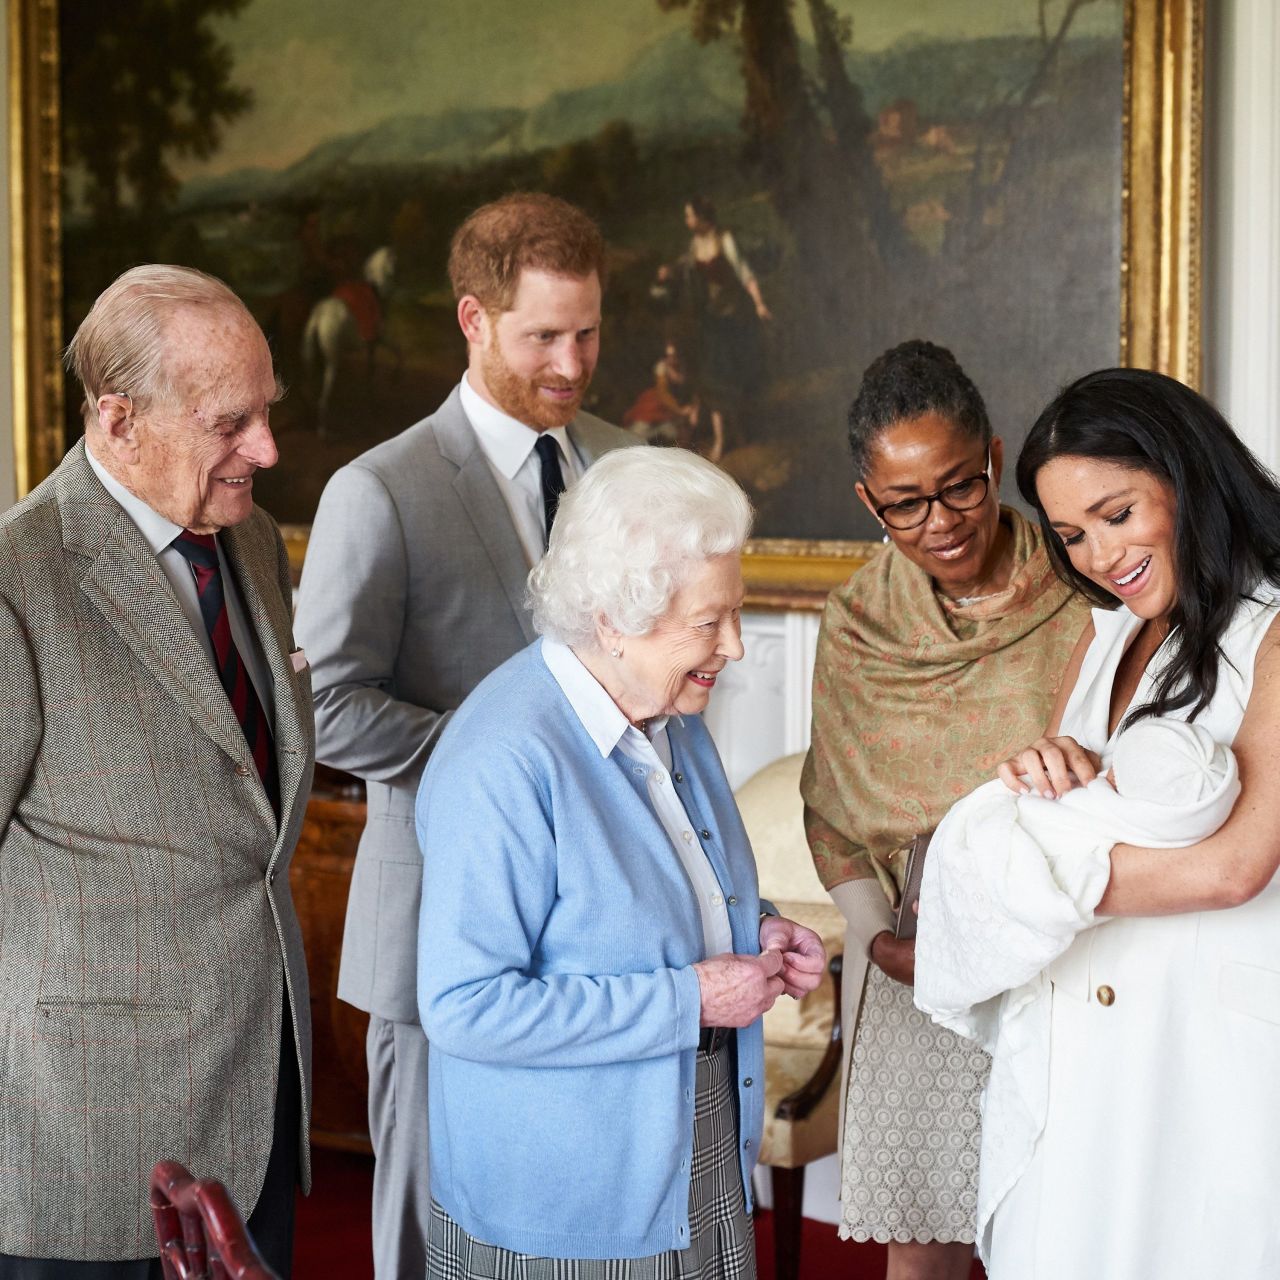 Britain's Queen Elizabeth II looks at <a href="https://www.cnn.com/2019/05/08/uk/gallery/archie-royal-baby-harry-meghan/index.html" target="_blank">her new great-grandchild, Archie,</a> in May 2019. Archie is the first child of Prince Harry, second from left, and his wife Meghan, the Duchess of Sussex. Prince Philip is on the far left. Meghan's mother, Doria Ragland, is next to her at right. 